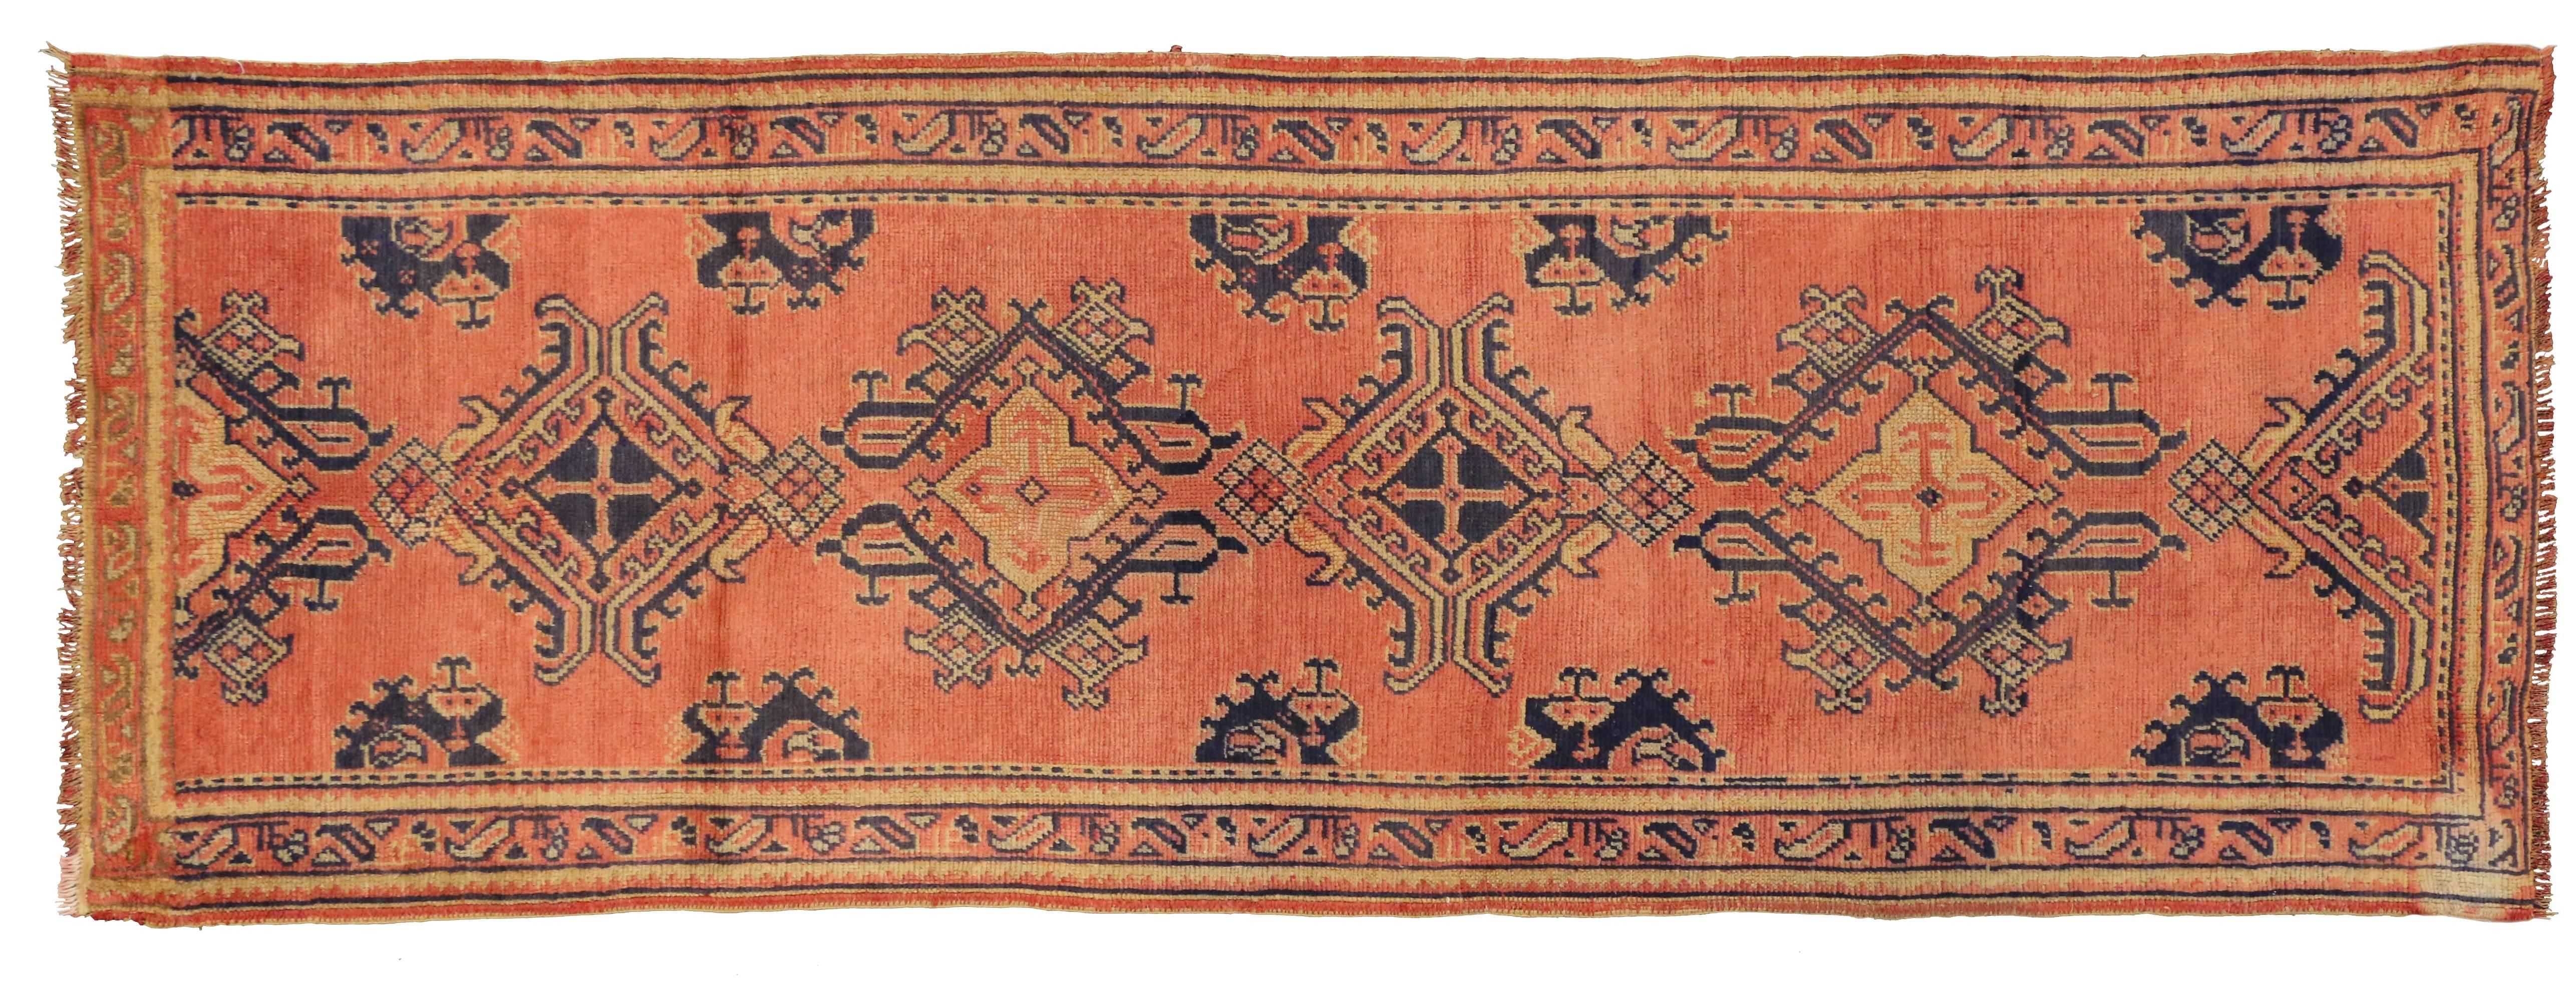 Vintage Turkish Oushak Runner with Eclectic Northwestern Style, Hallway Runner For Sale 4